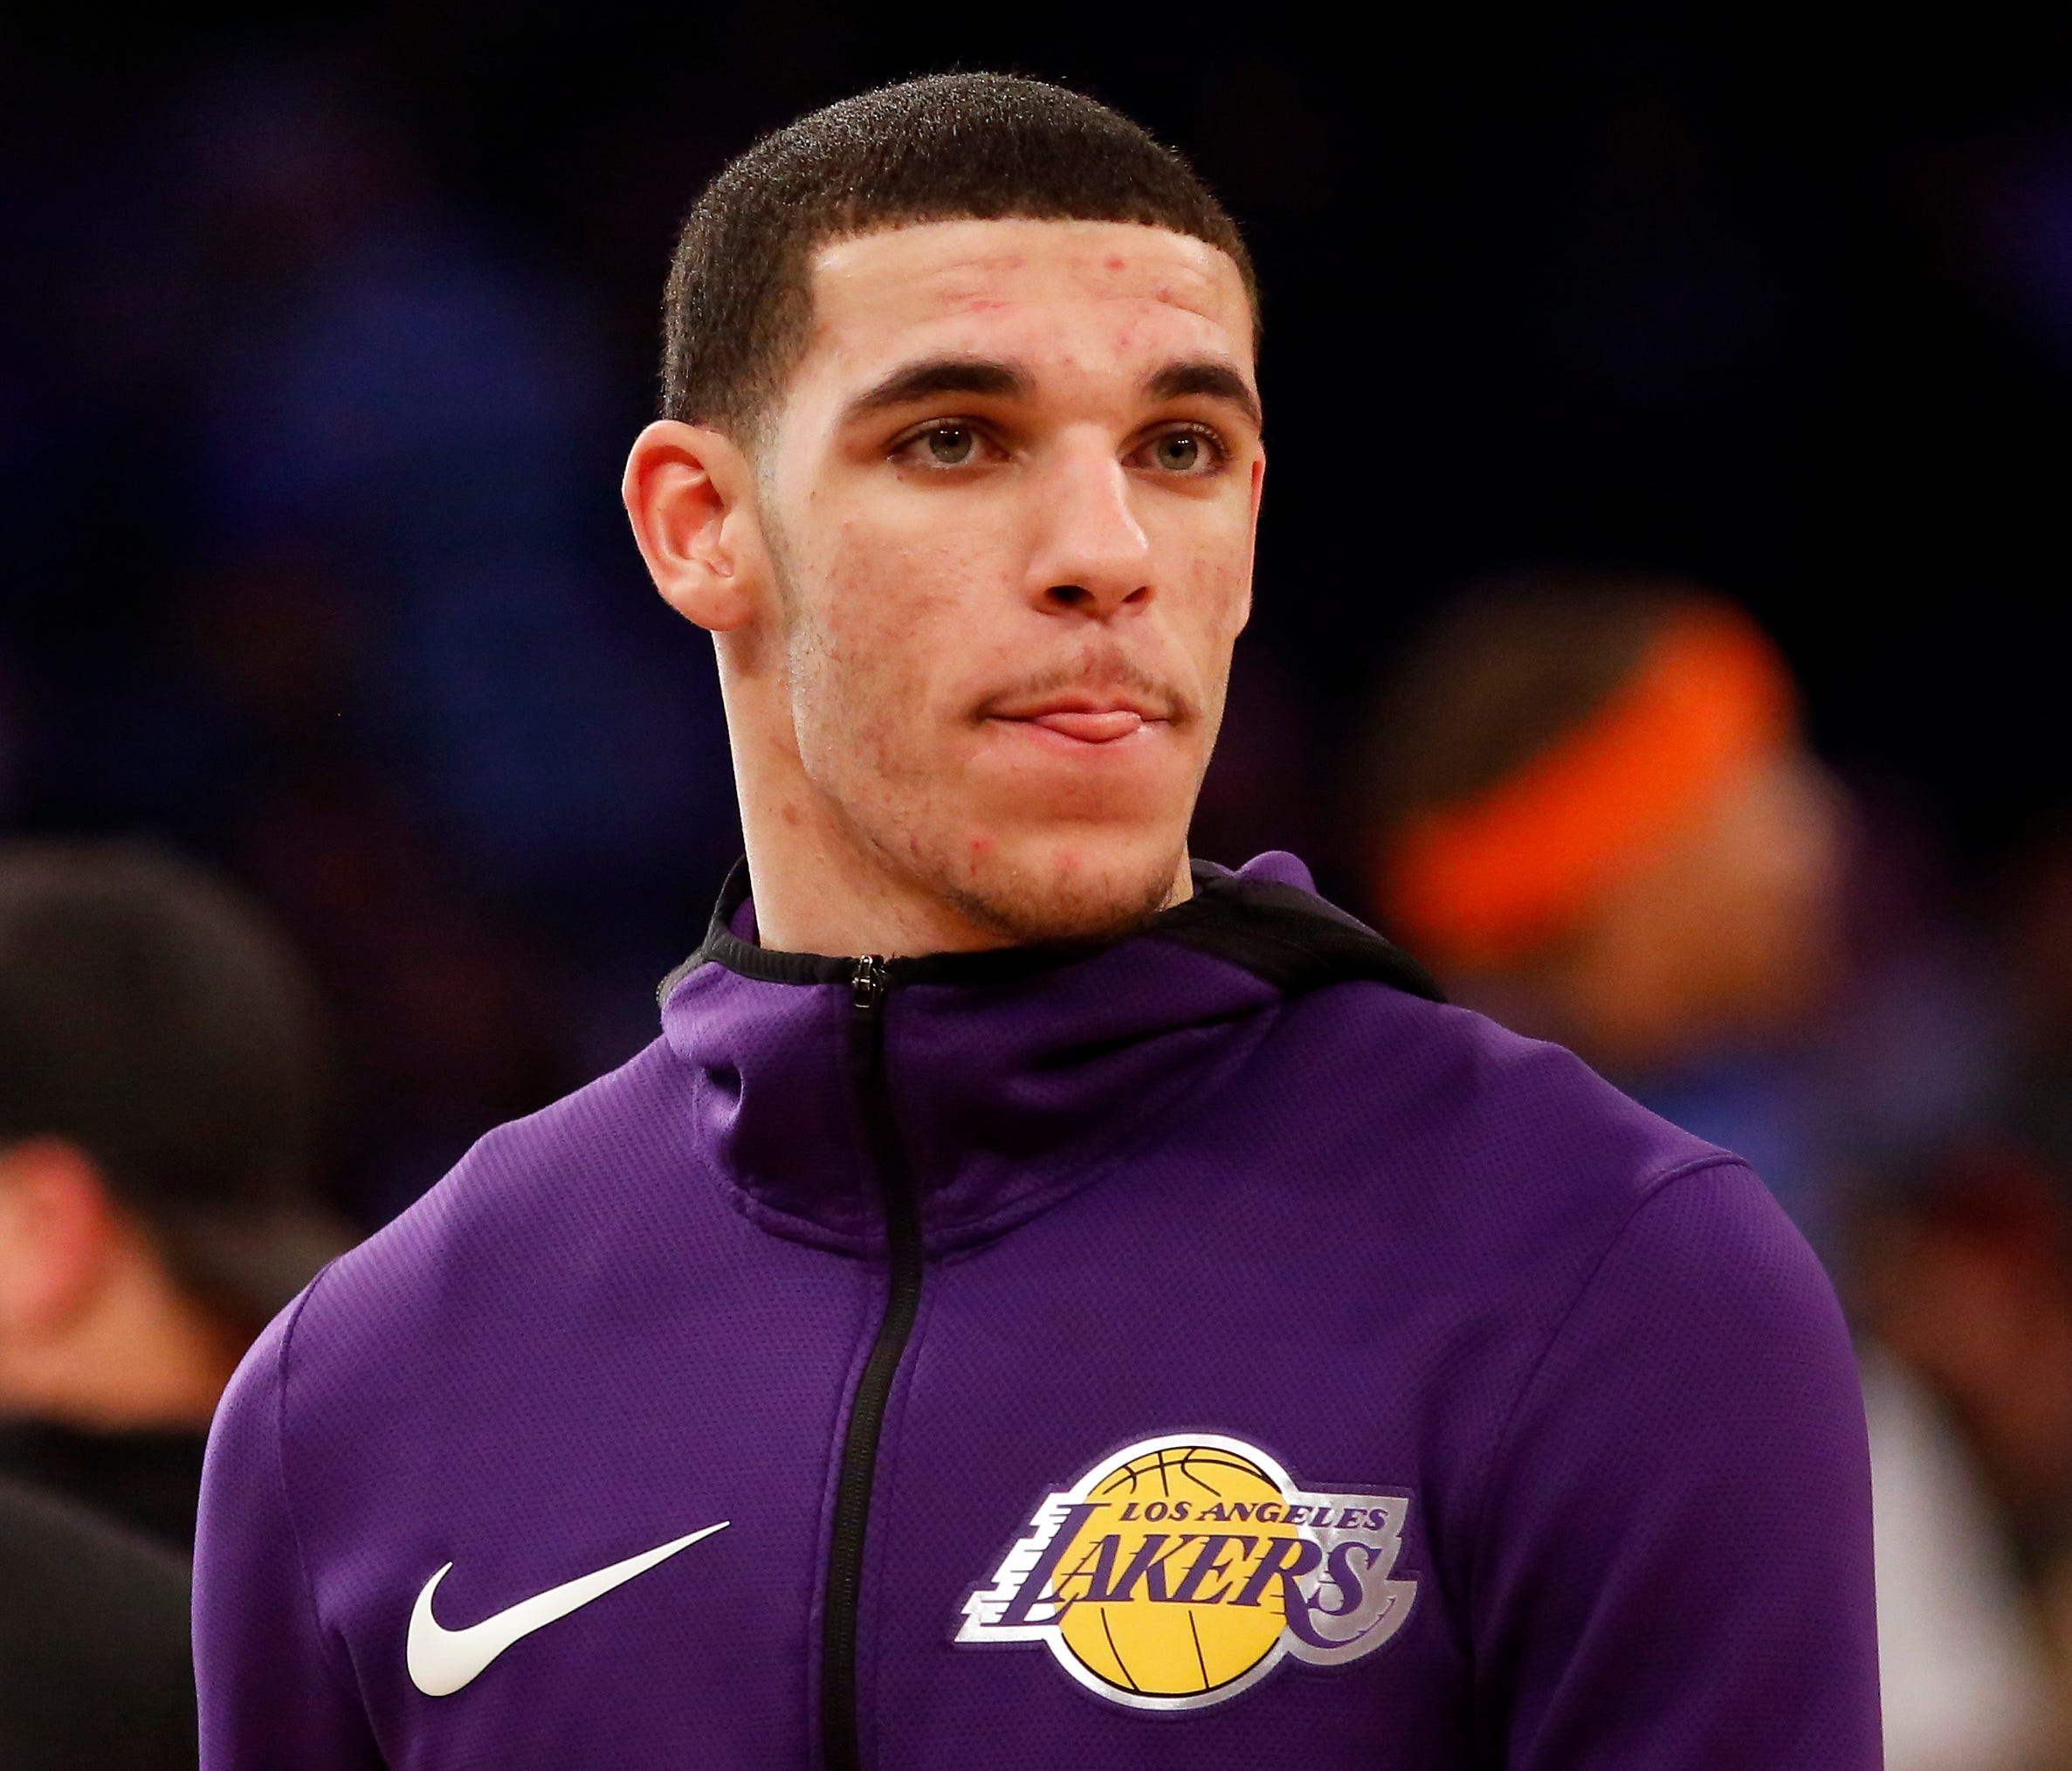 Los Angeles Lakers guard Lonzo Ball warms up prior to taking on the New York Knicks at Madison Square Garden.